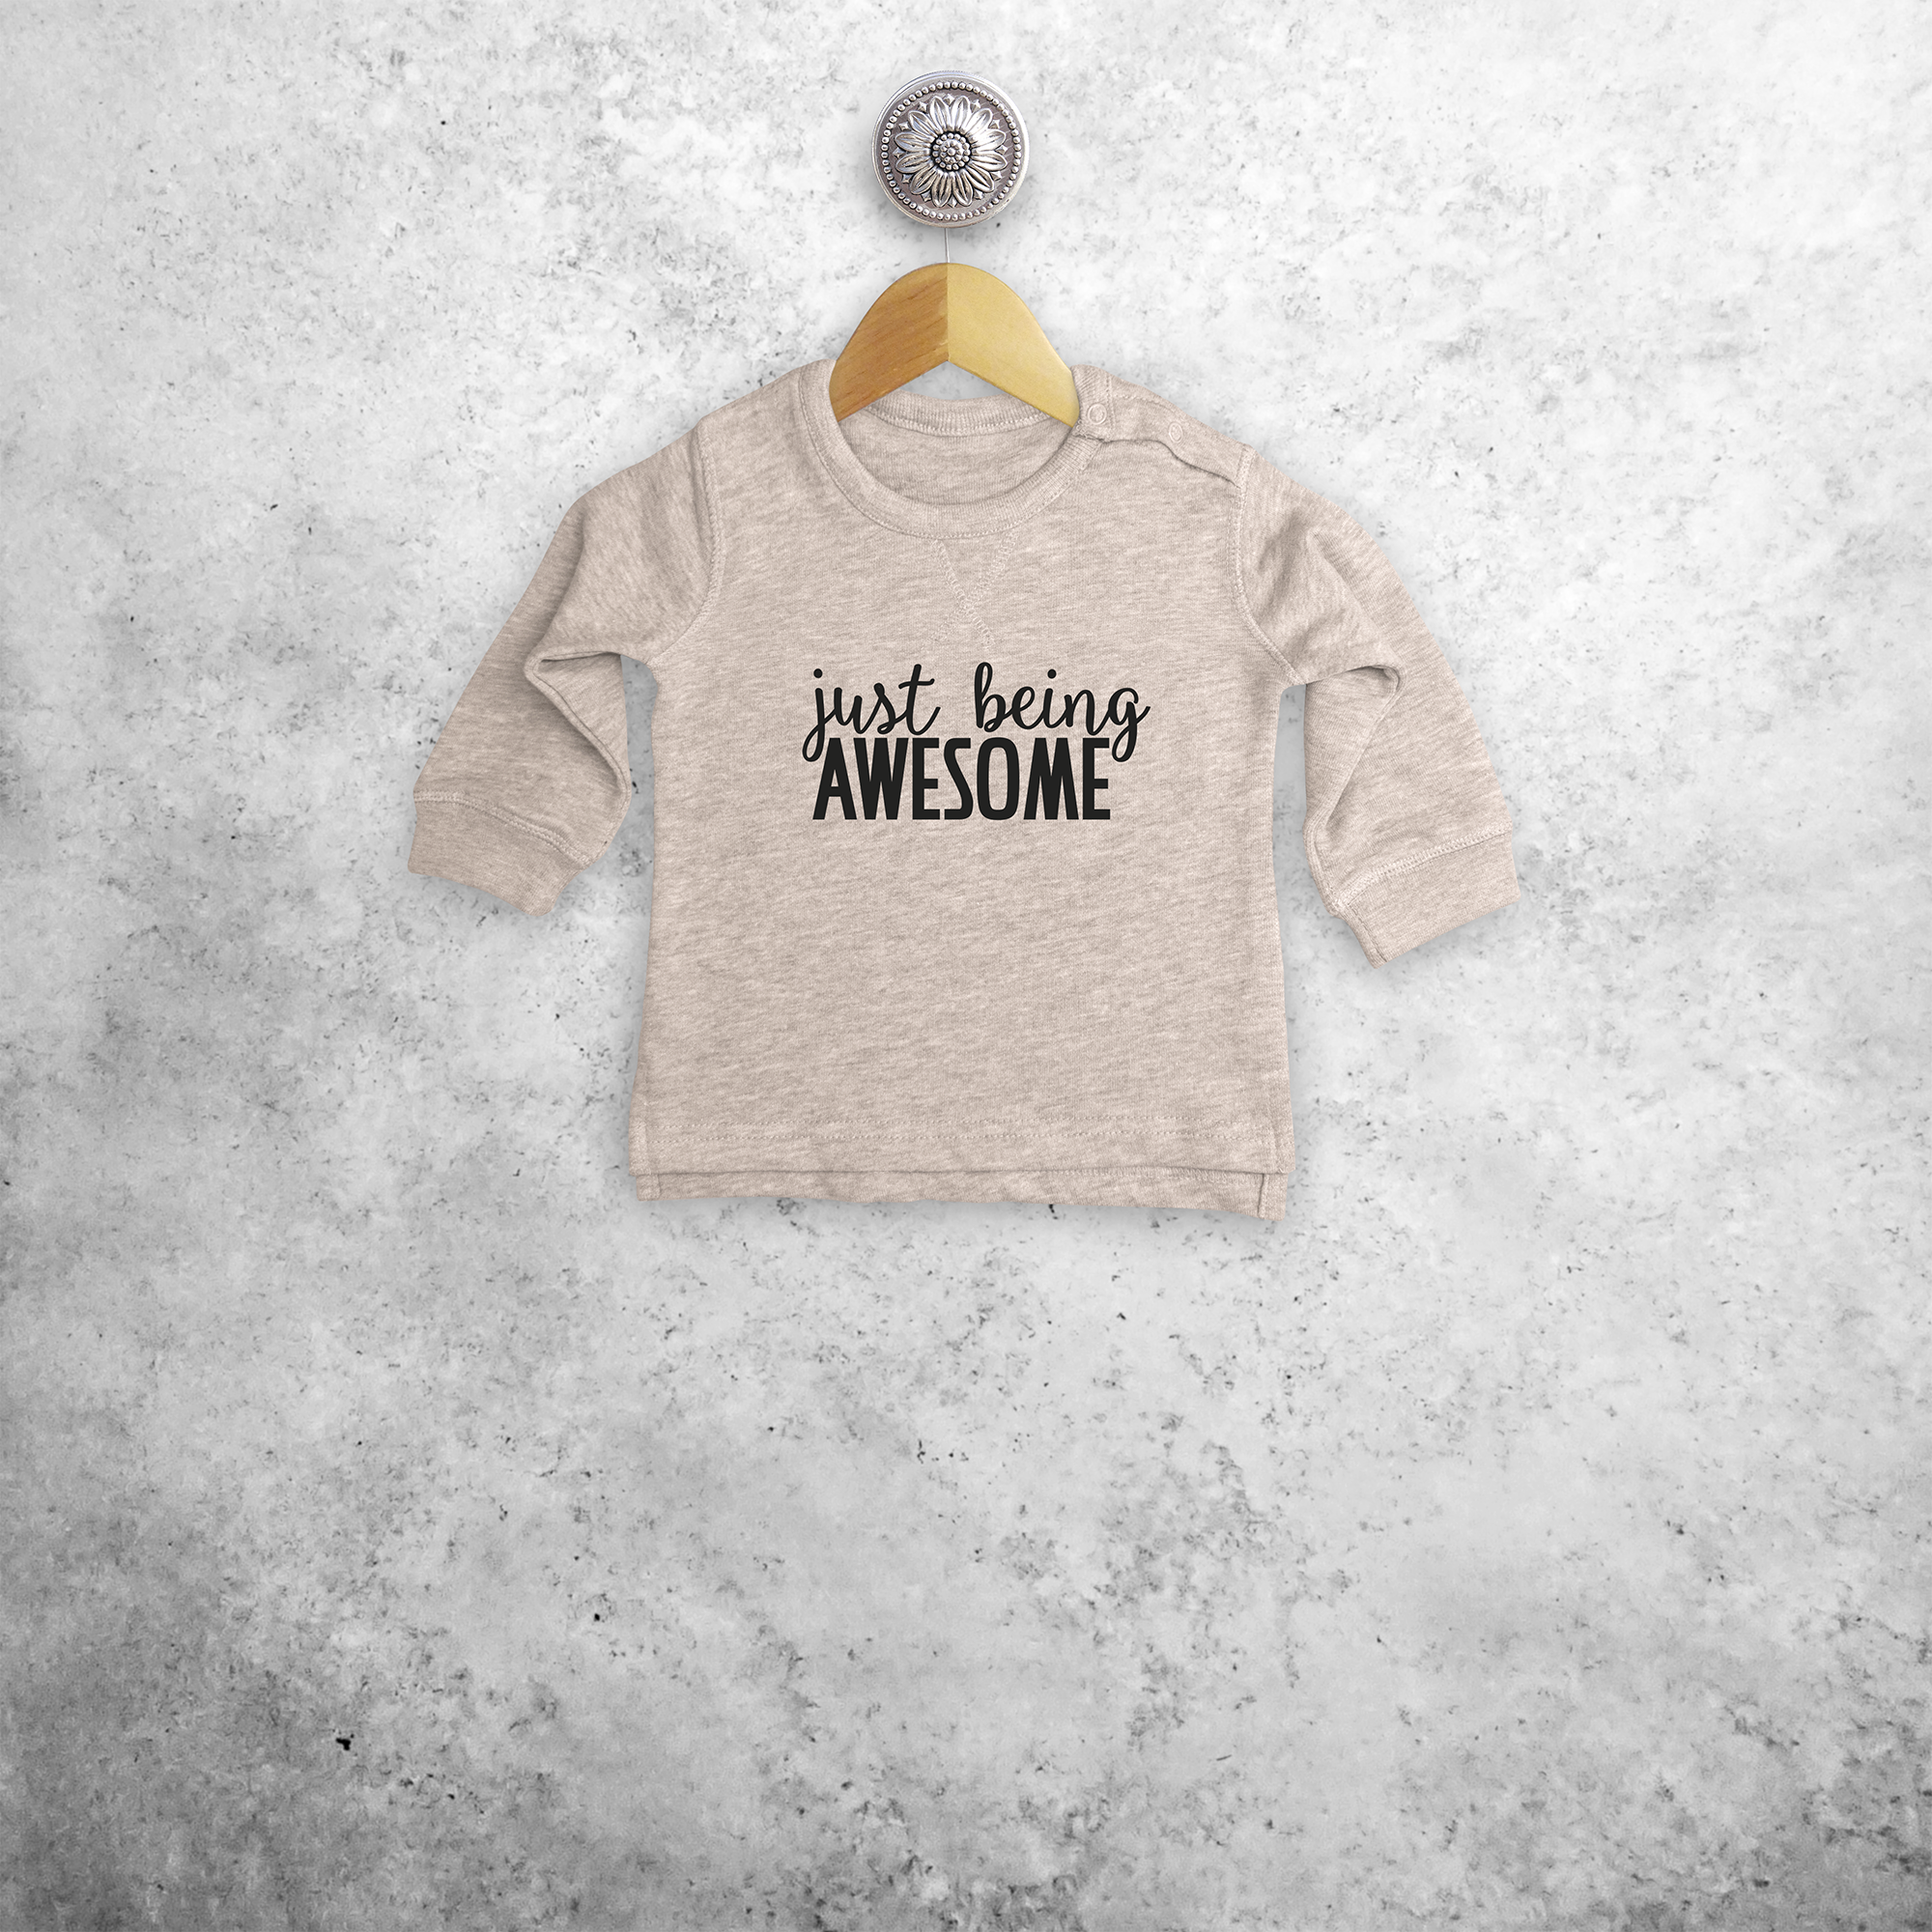 'Just being awesome' baby sweater